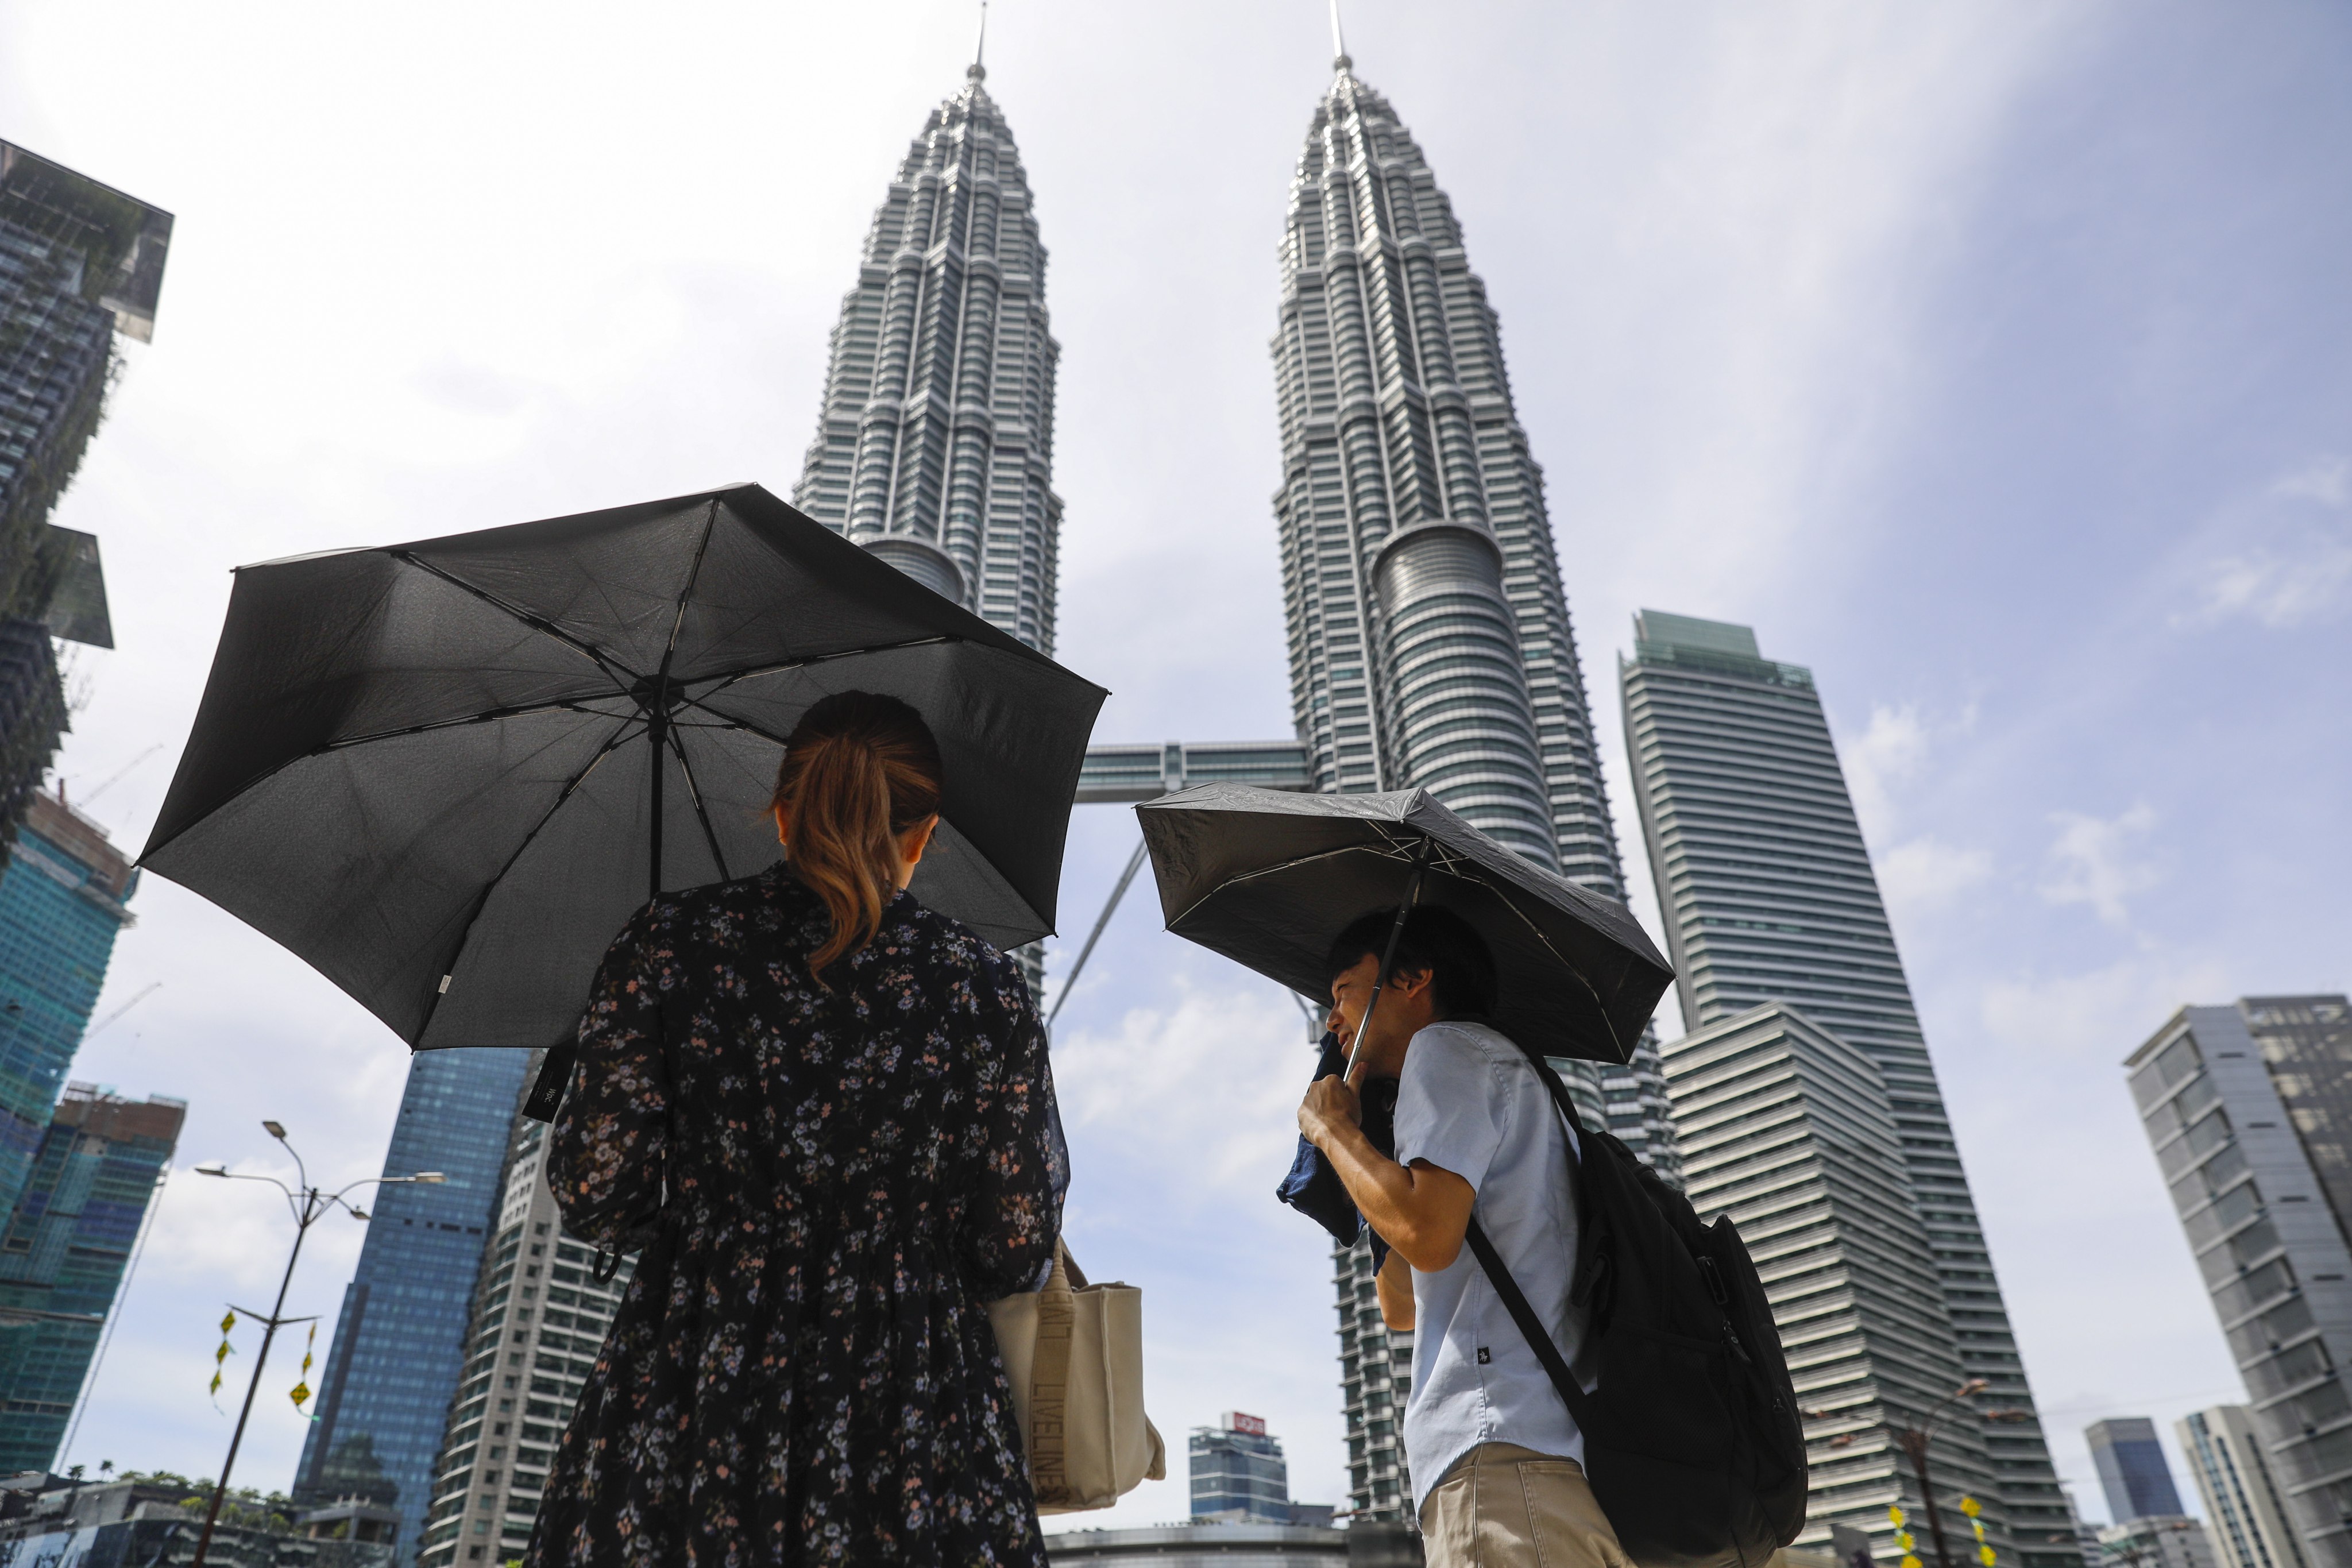 People use umbrellas during a hot day in Kuala Lumpur on April 27. Malaysia’s economy is largely driven by its depleting oil and gas industry, but the nation gets year-round sunlight that is shining the light on the potential for Malaysia to be a leading producer of renewable energy in the region. Photo: EPA-EFE